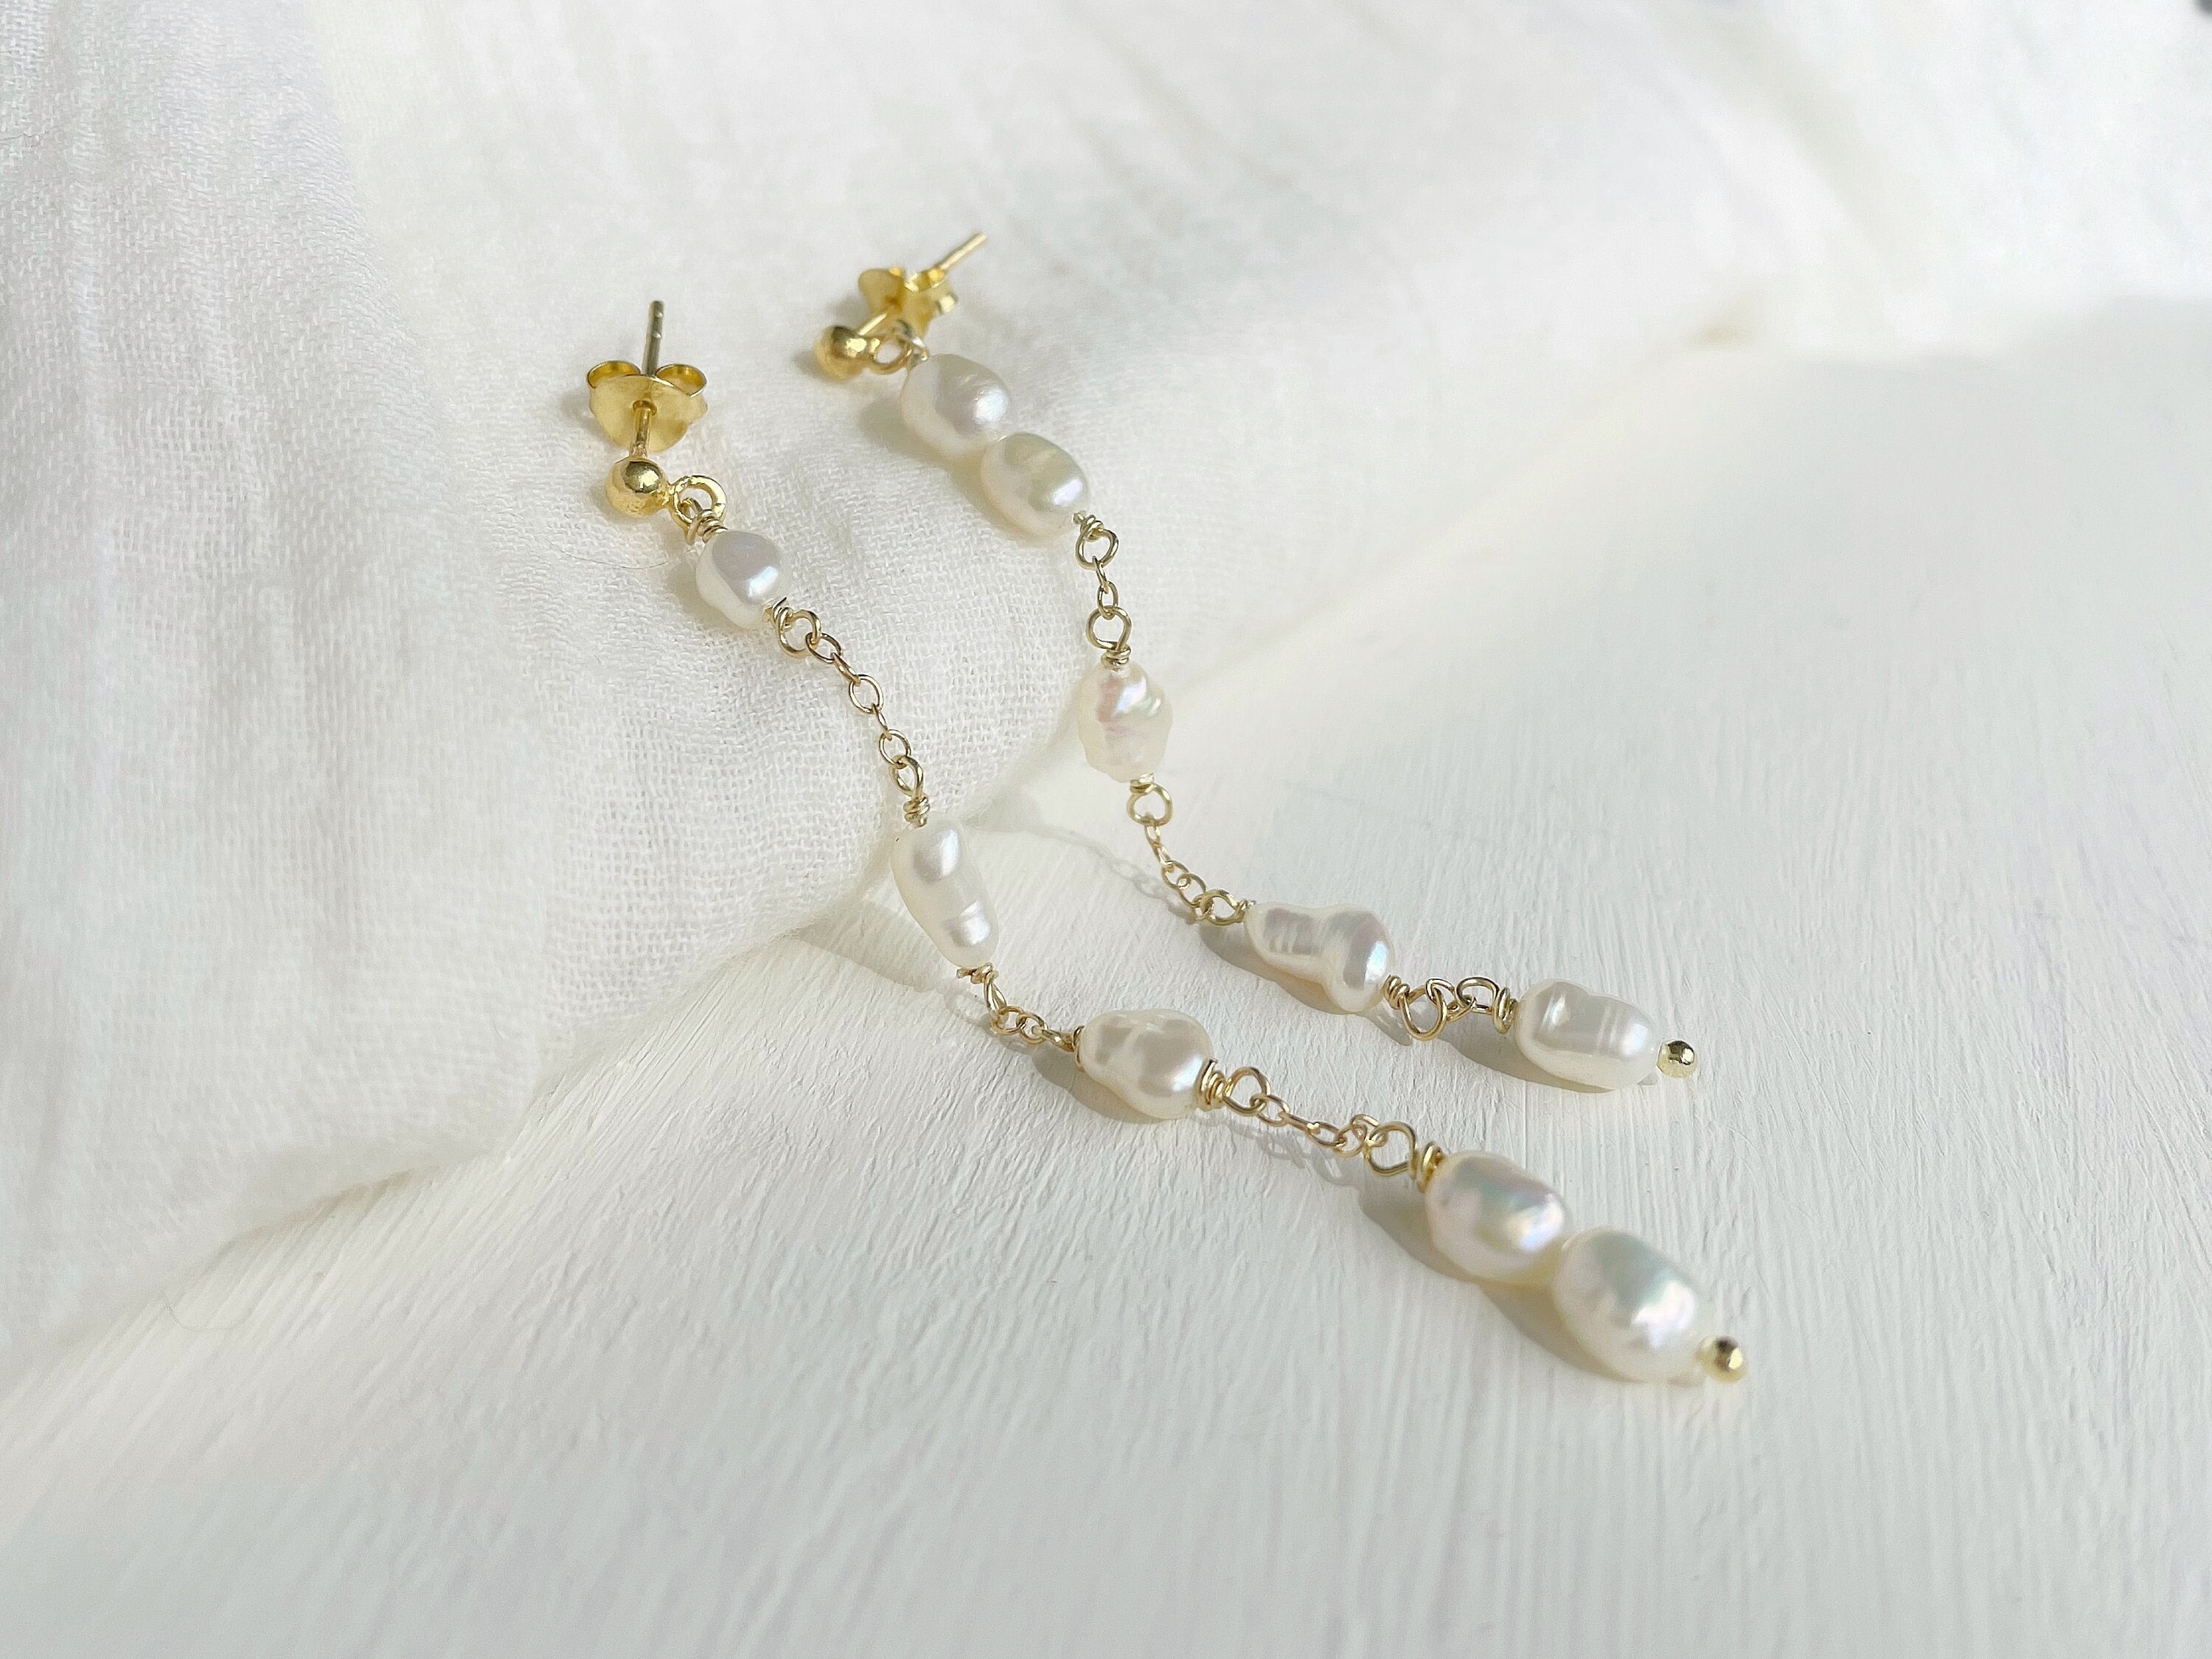 Discover more than 188 pearl earrings with gold posts